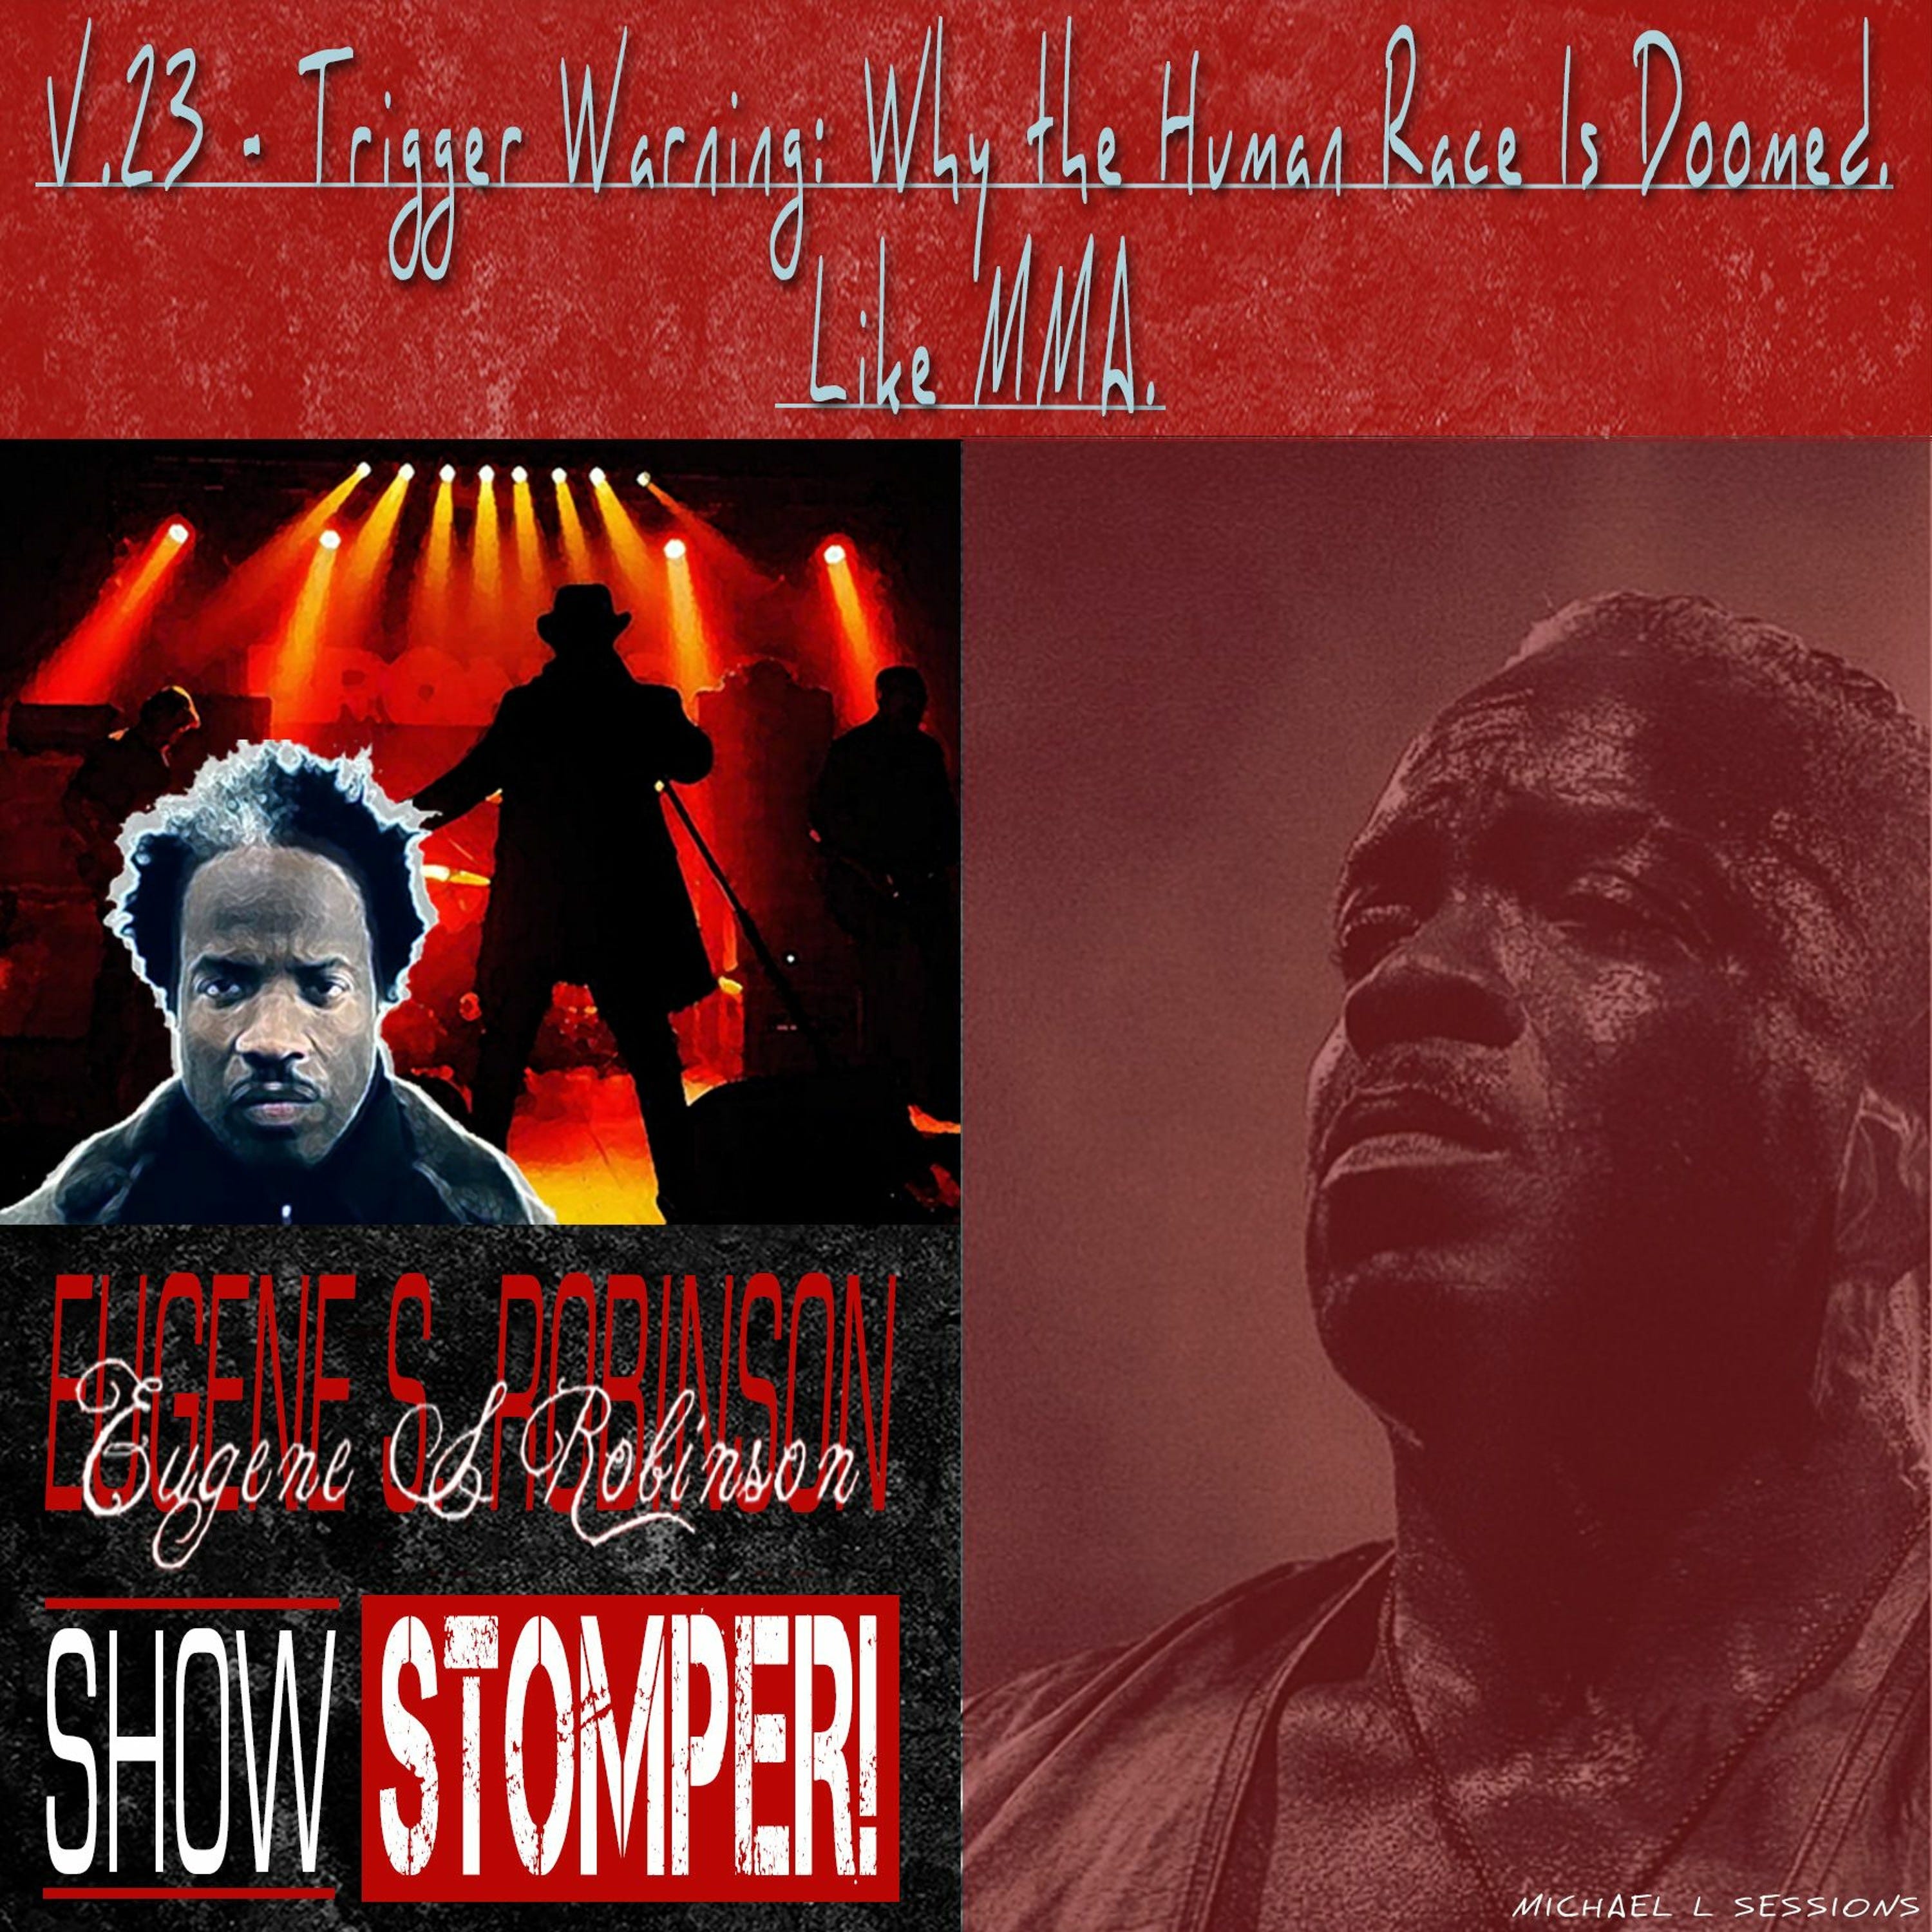 The Eugene S. Robinson Show Stomper! V.23 - Trigger Warning: Why The Human Race Is Doomed. Like MMA.